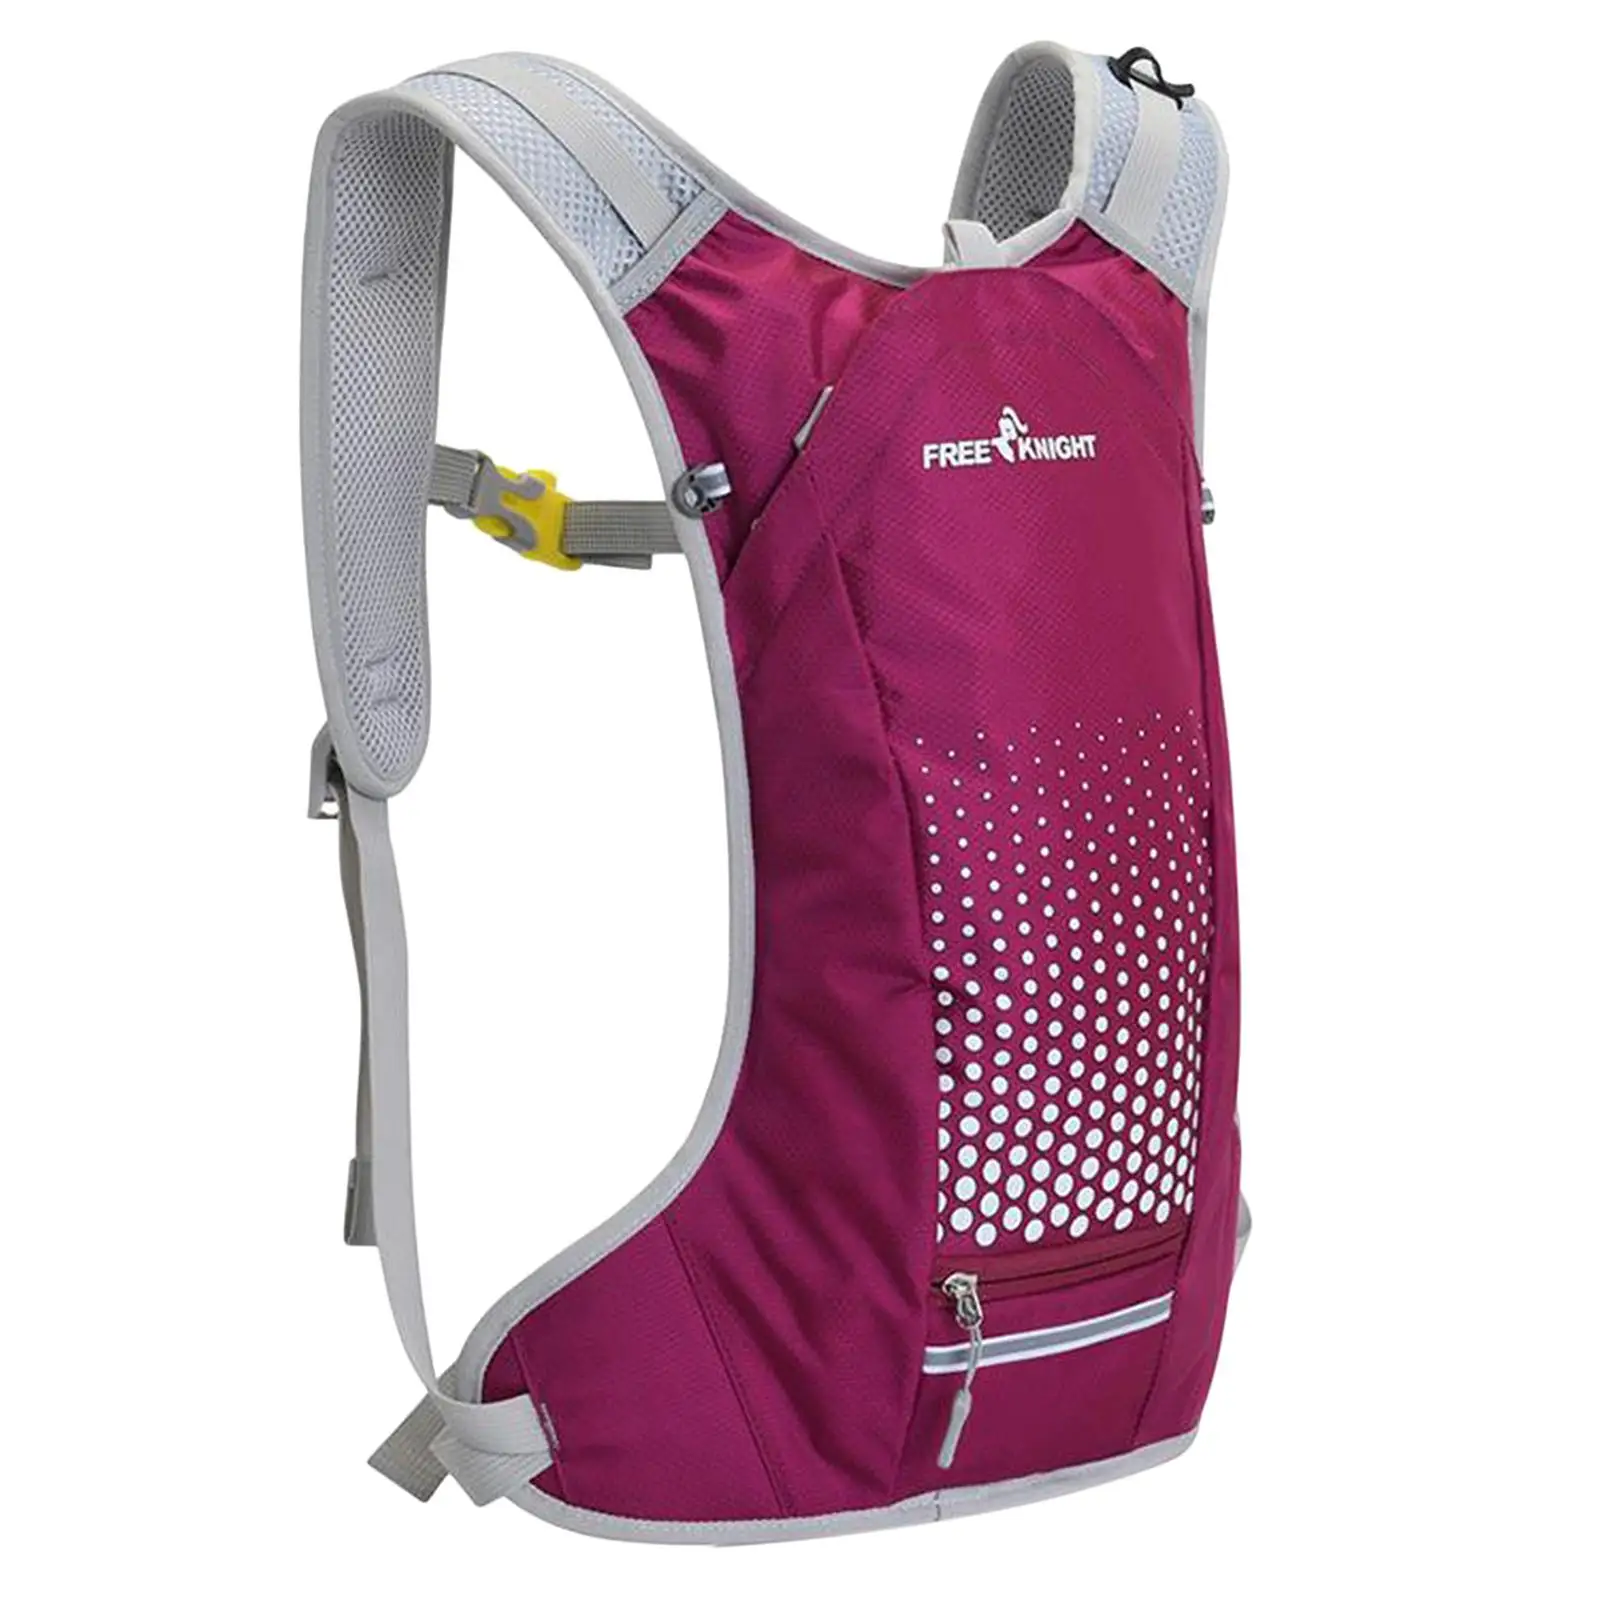  Backpack Running Backpack Sports Backpack for Biking Riding Hiking Camping